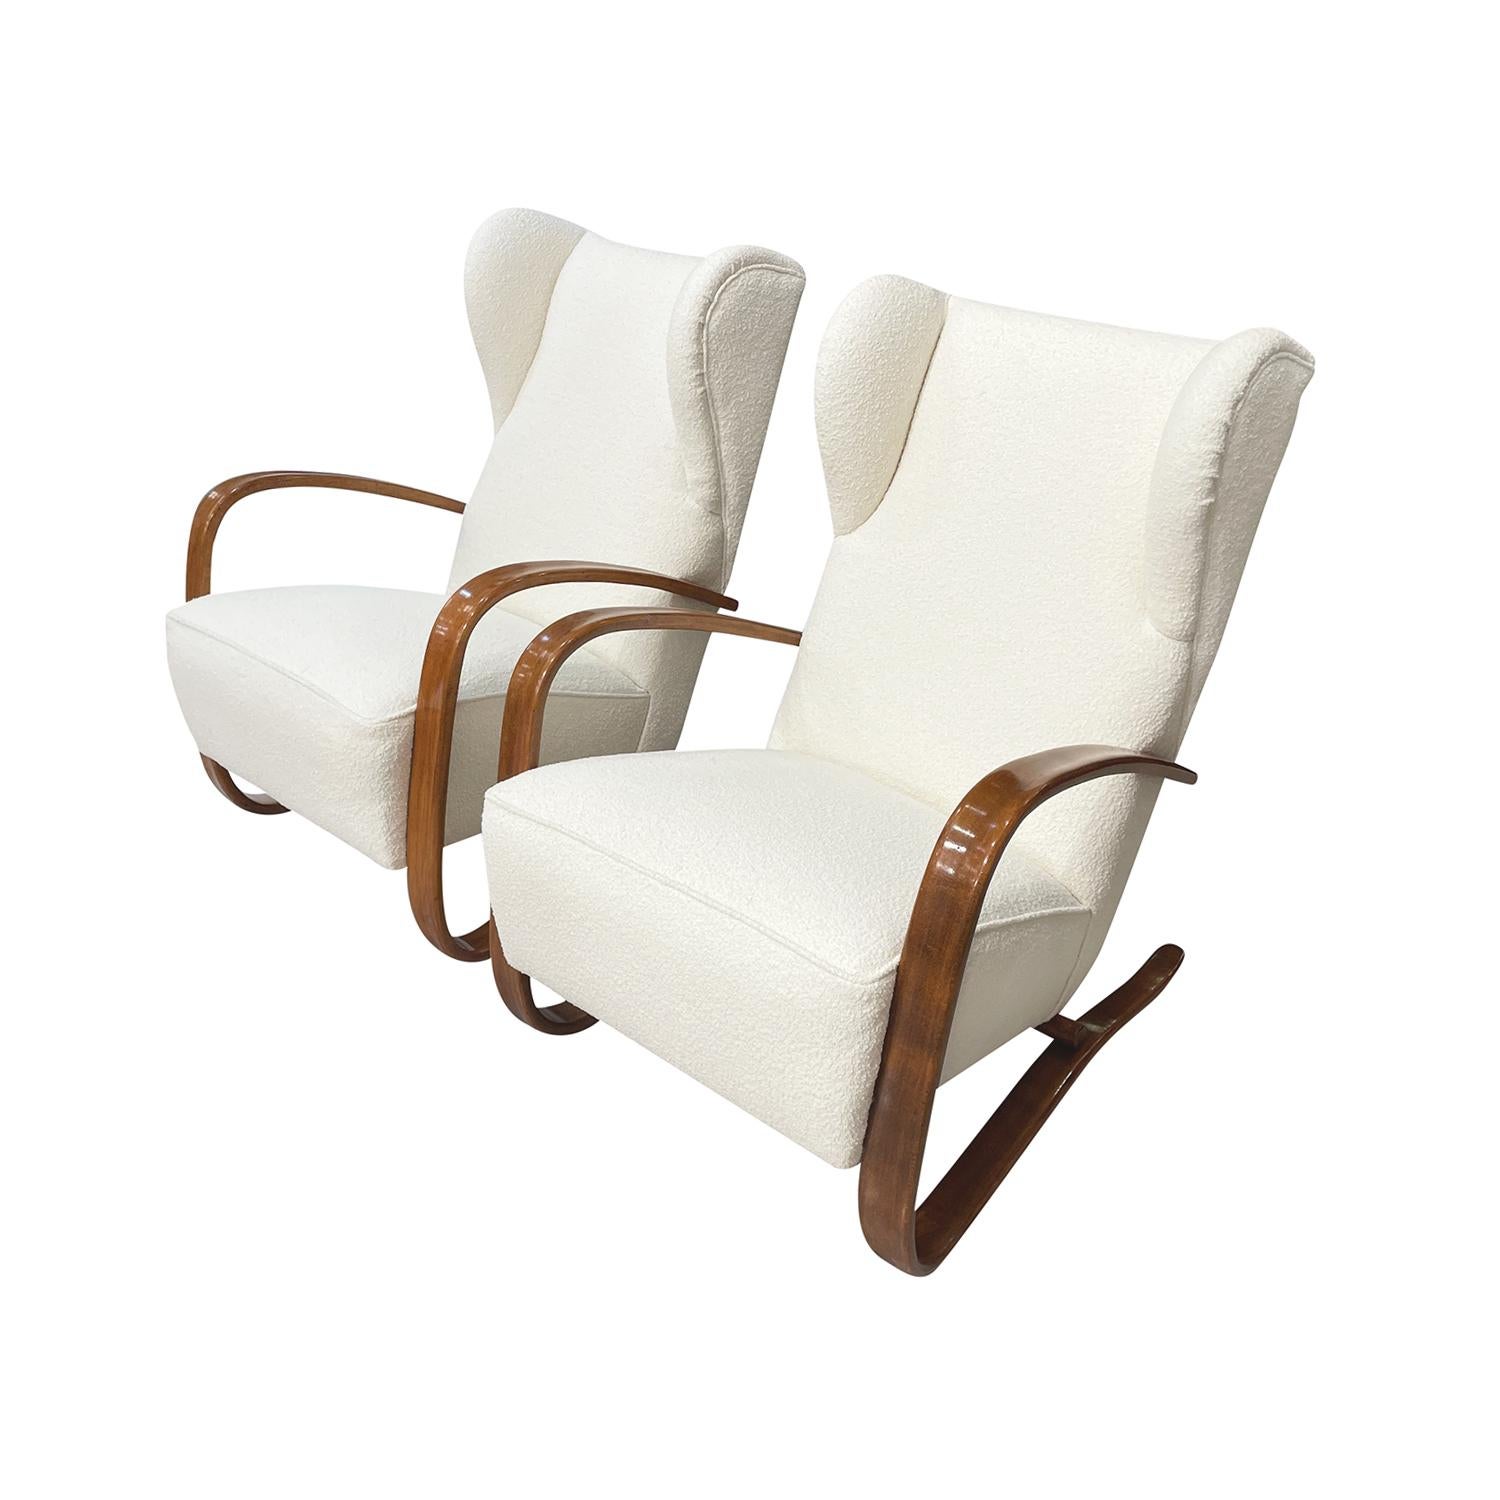 20th Century Czech Pair of Mahogany H269 Lounge Chairs by Jindrich Halabala In Good Condition For Sale In West Palm Beach, FL